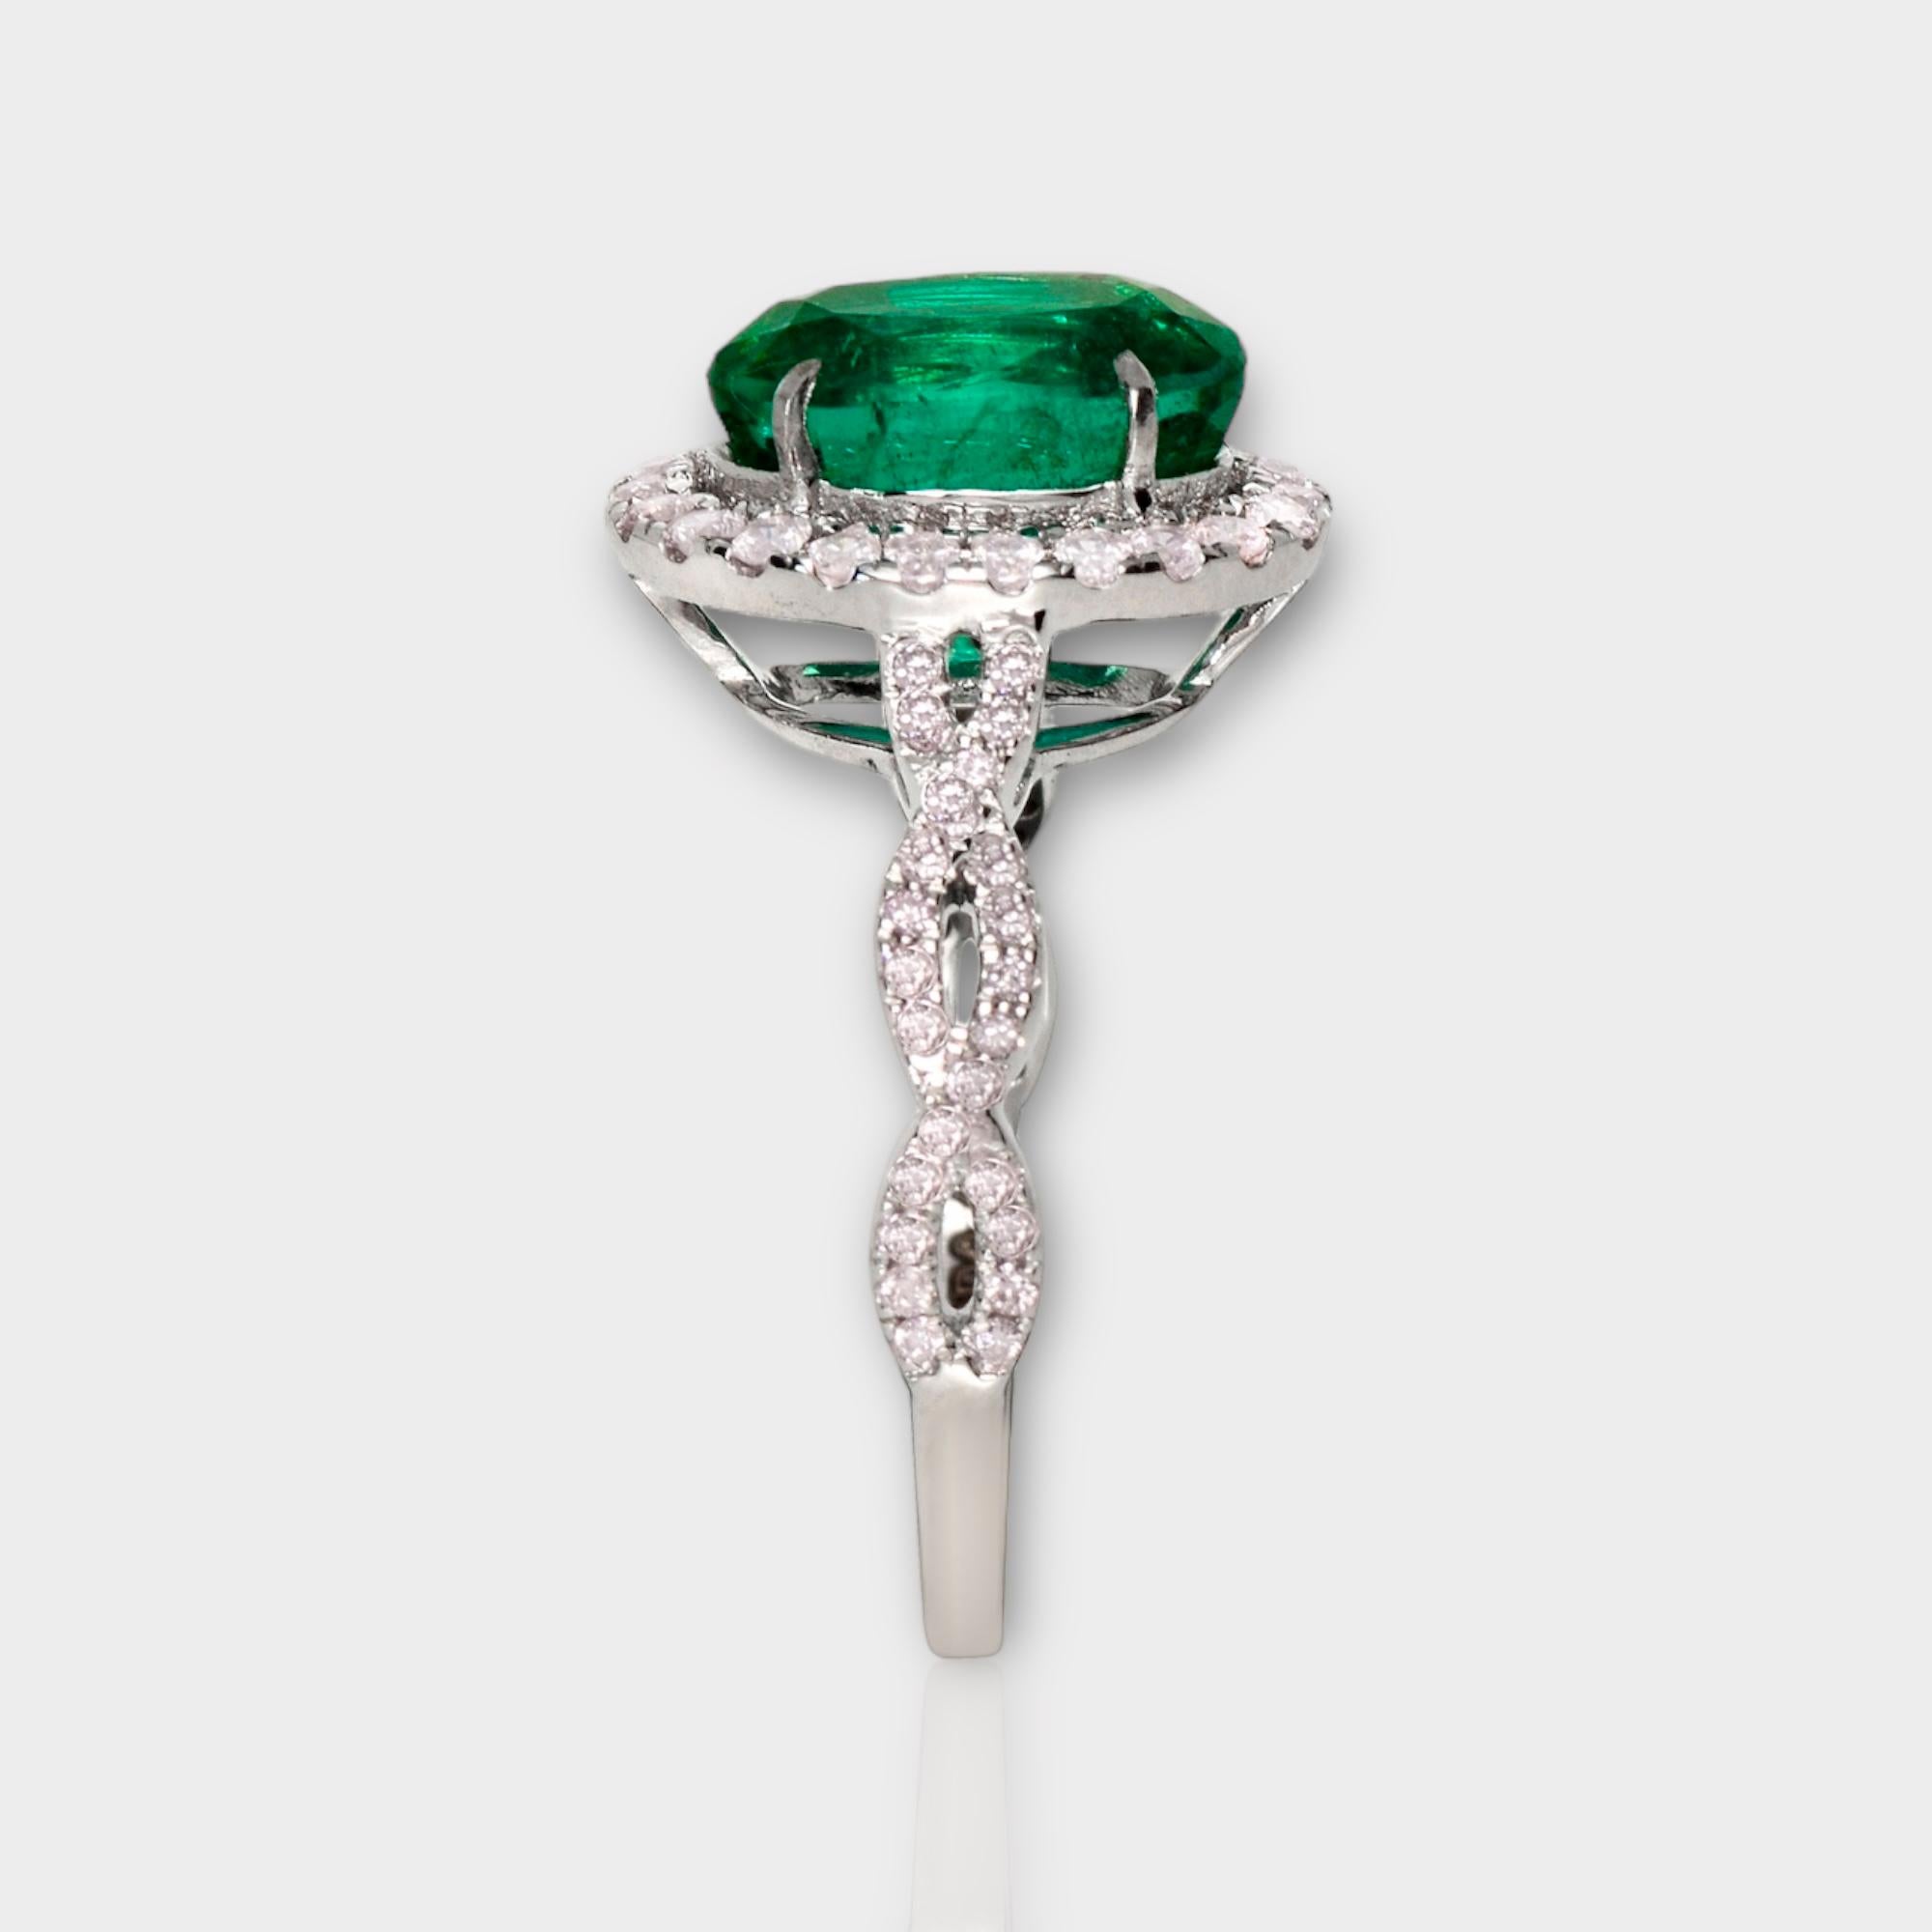 IGI 18k 2.67 Ct Emerald&Pink Diamonds Antique Art Deco Style Engagement Ring In New Condition For Sale In Kaohsiung City, TW